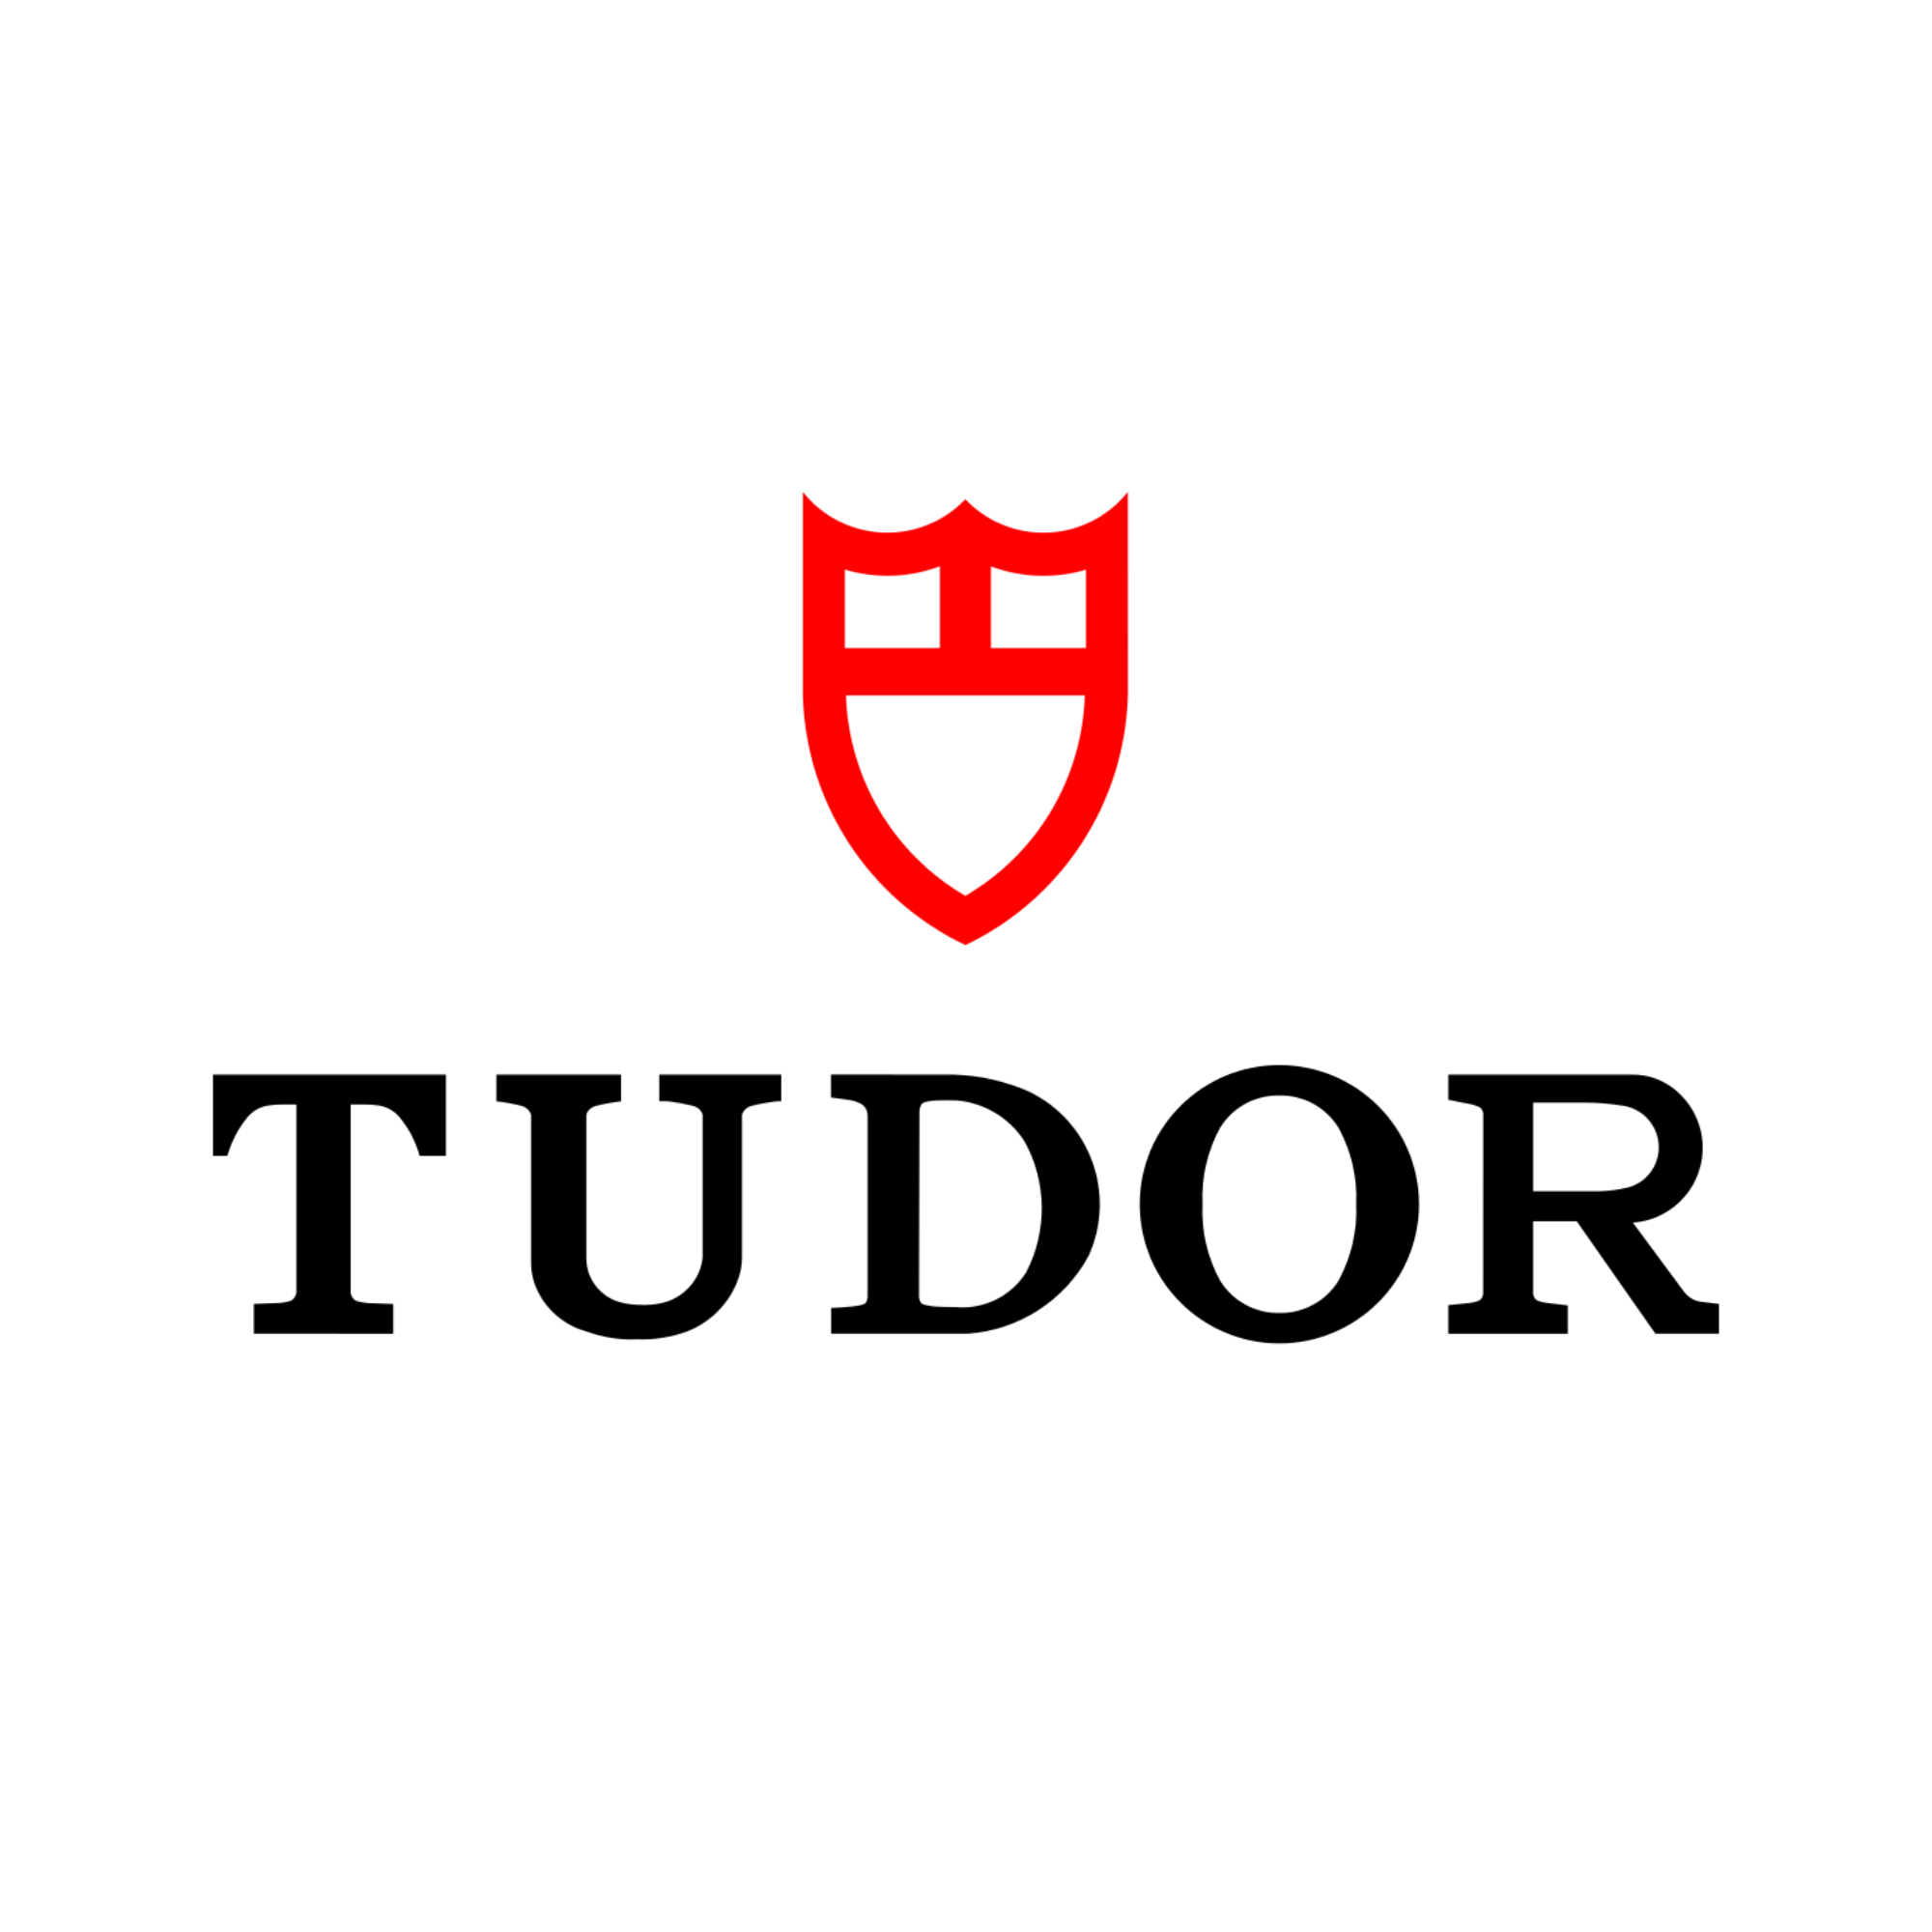 Tudor watches at Henne Jewelers